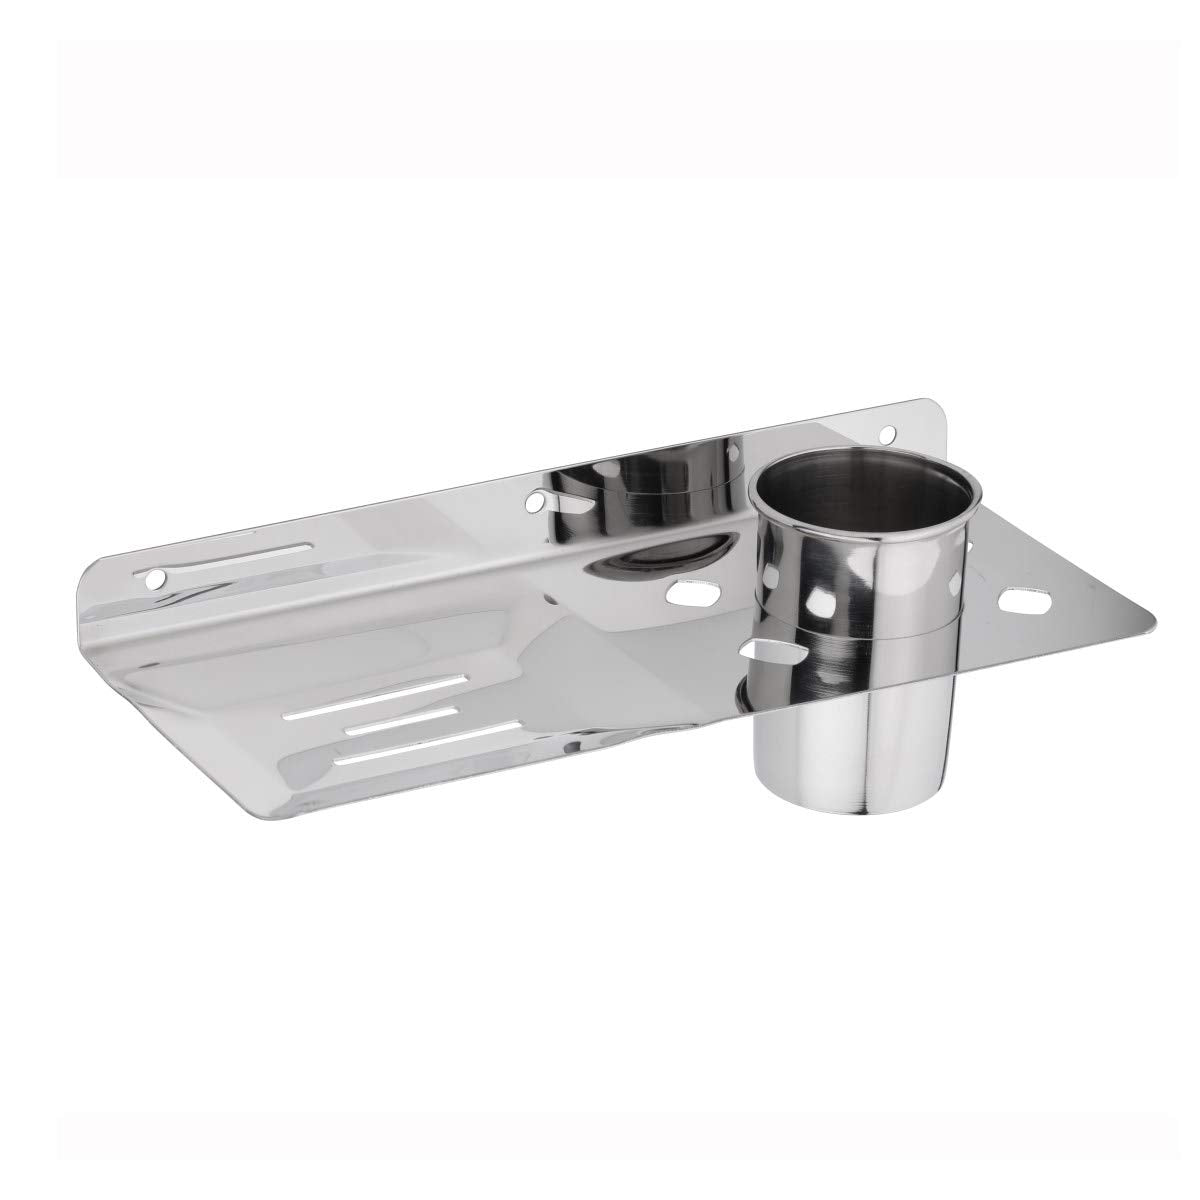 Plantex Platinum Stainless Steel Soap Dish with Tumbler Holder Bathroom Accessories - Pack of 1